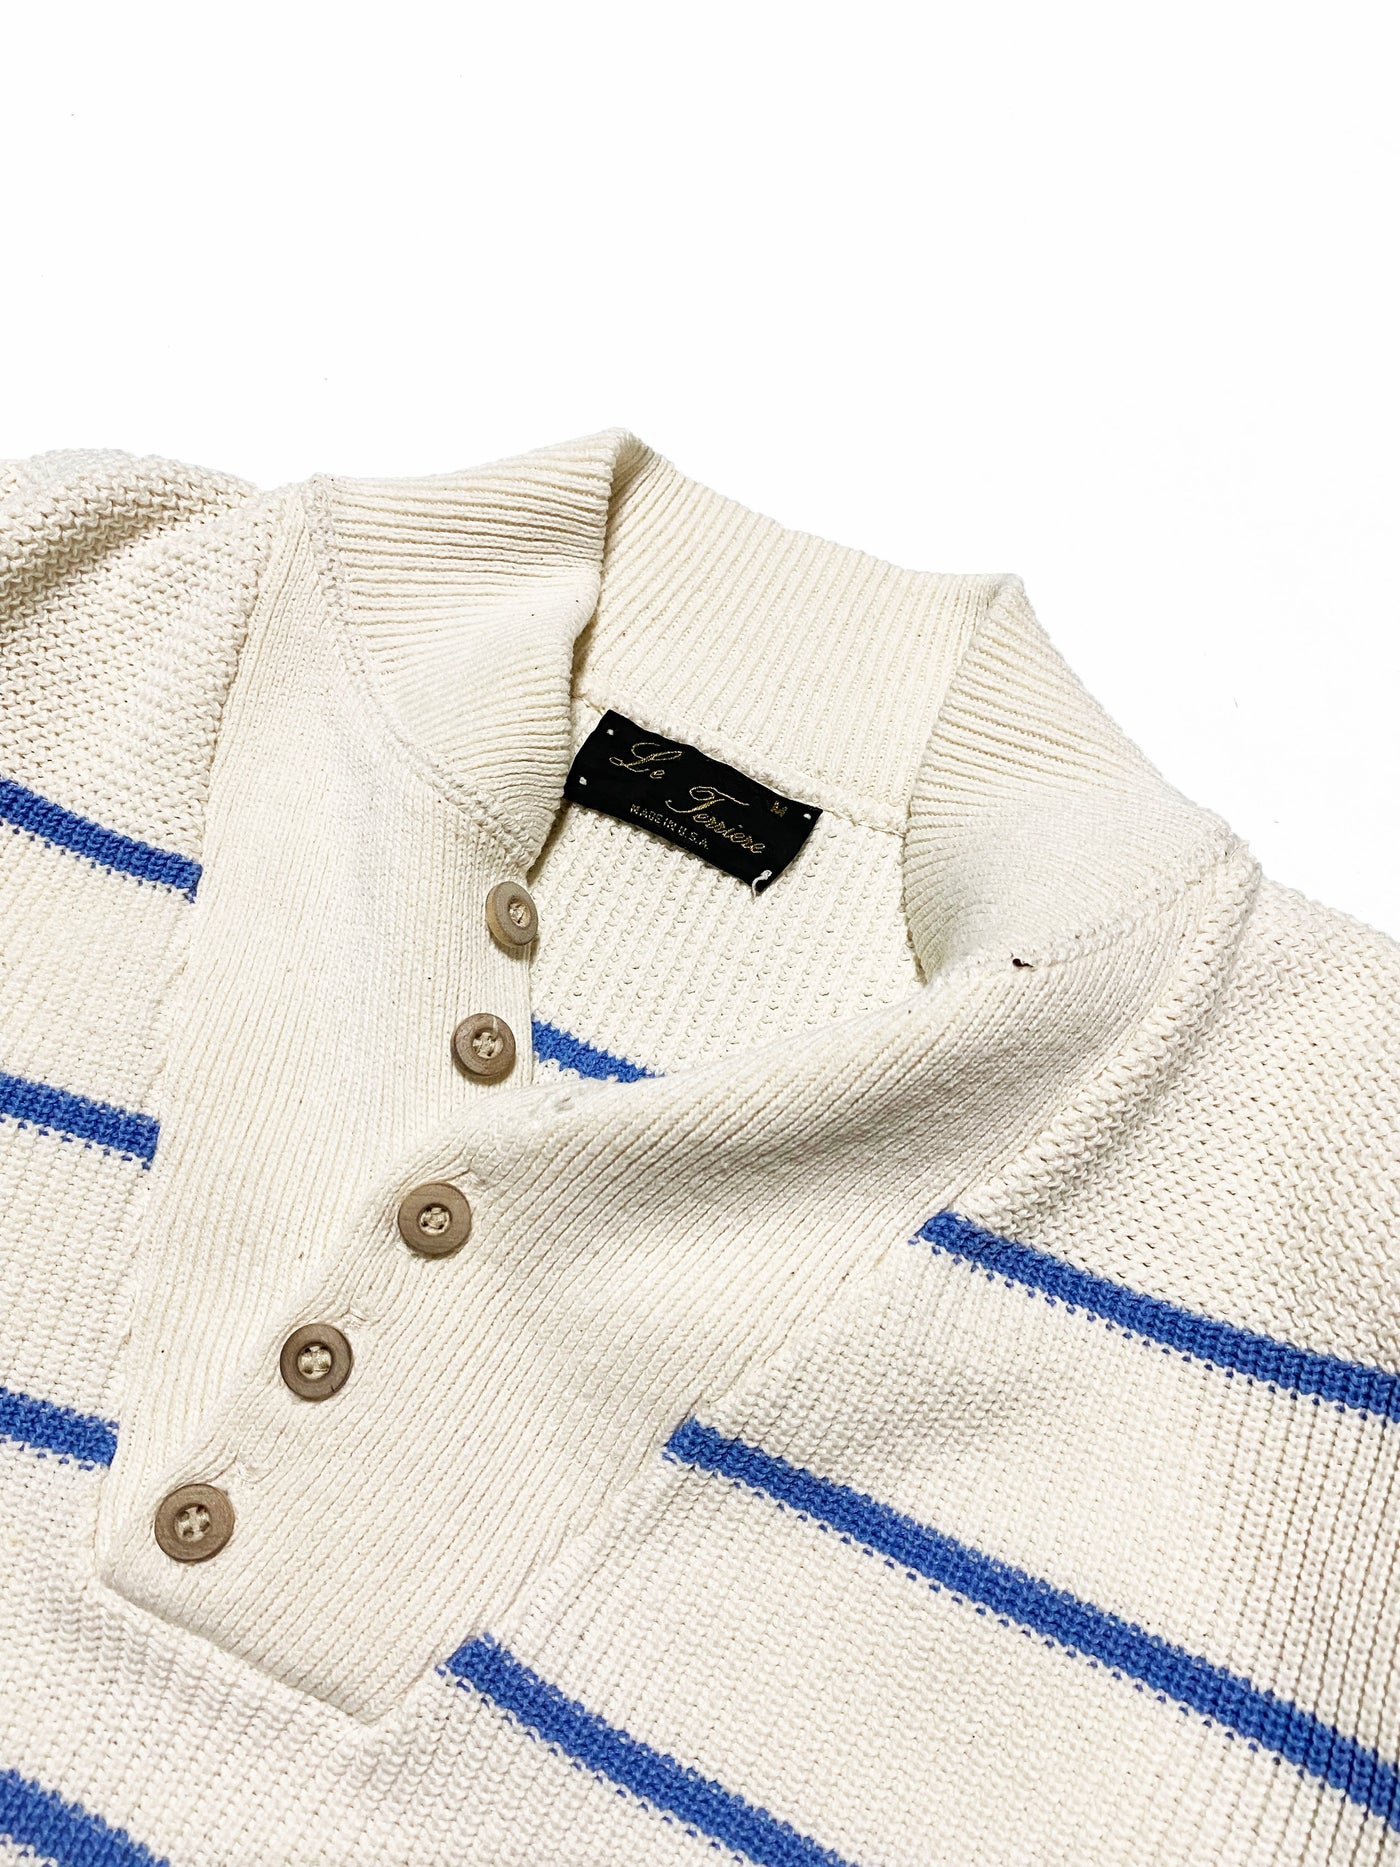 Vintage 80s Le Terrier Striped Sweater